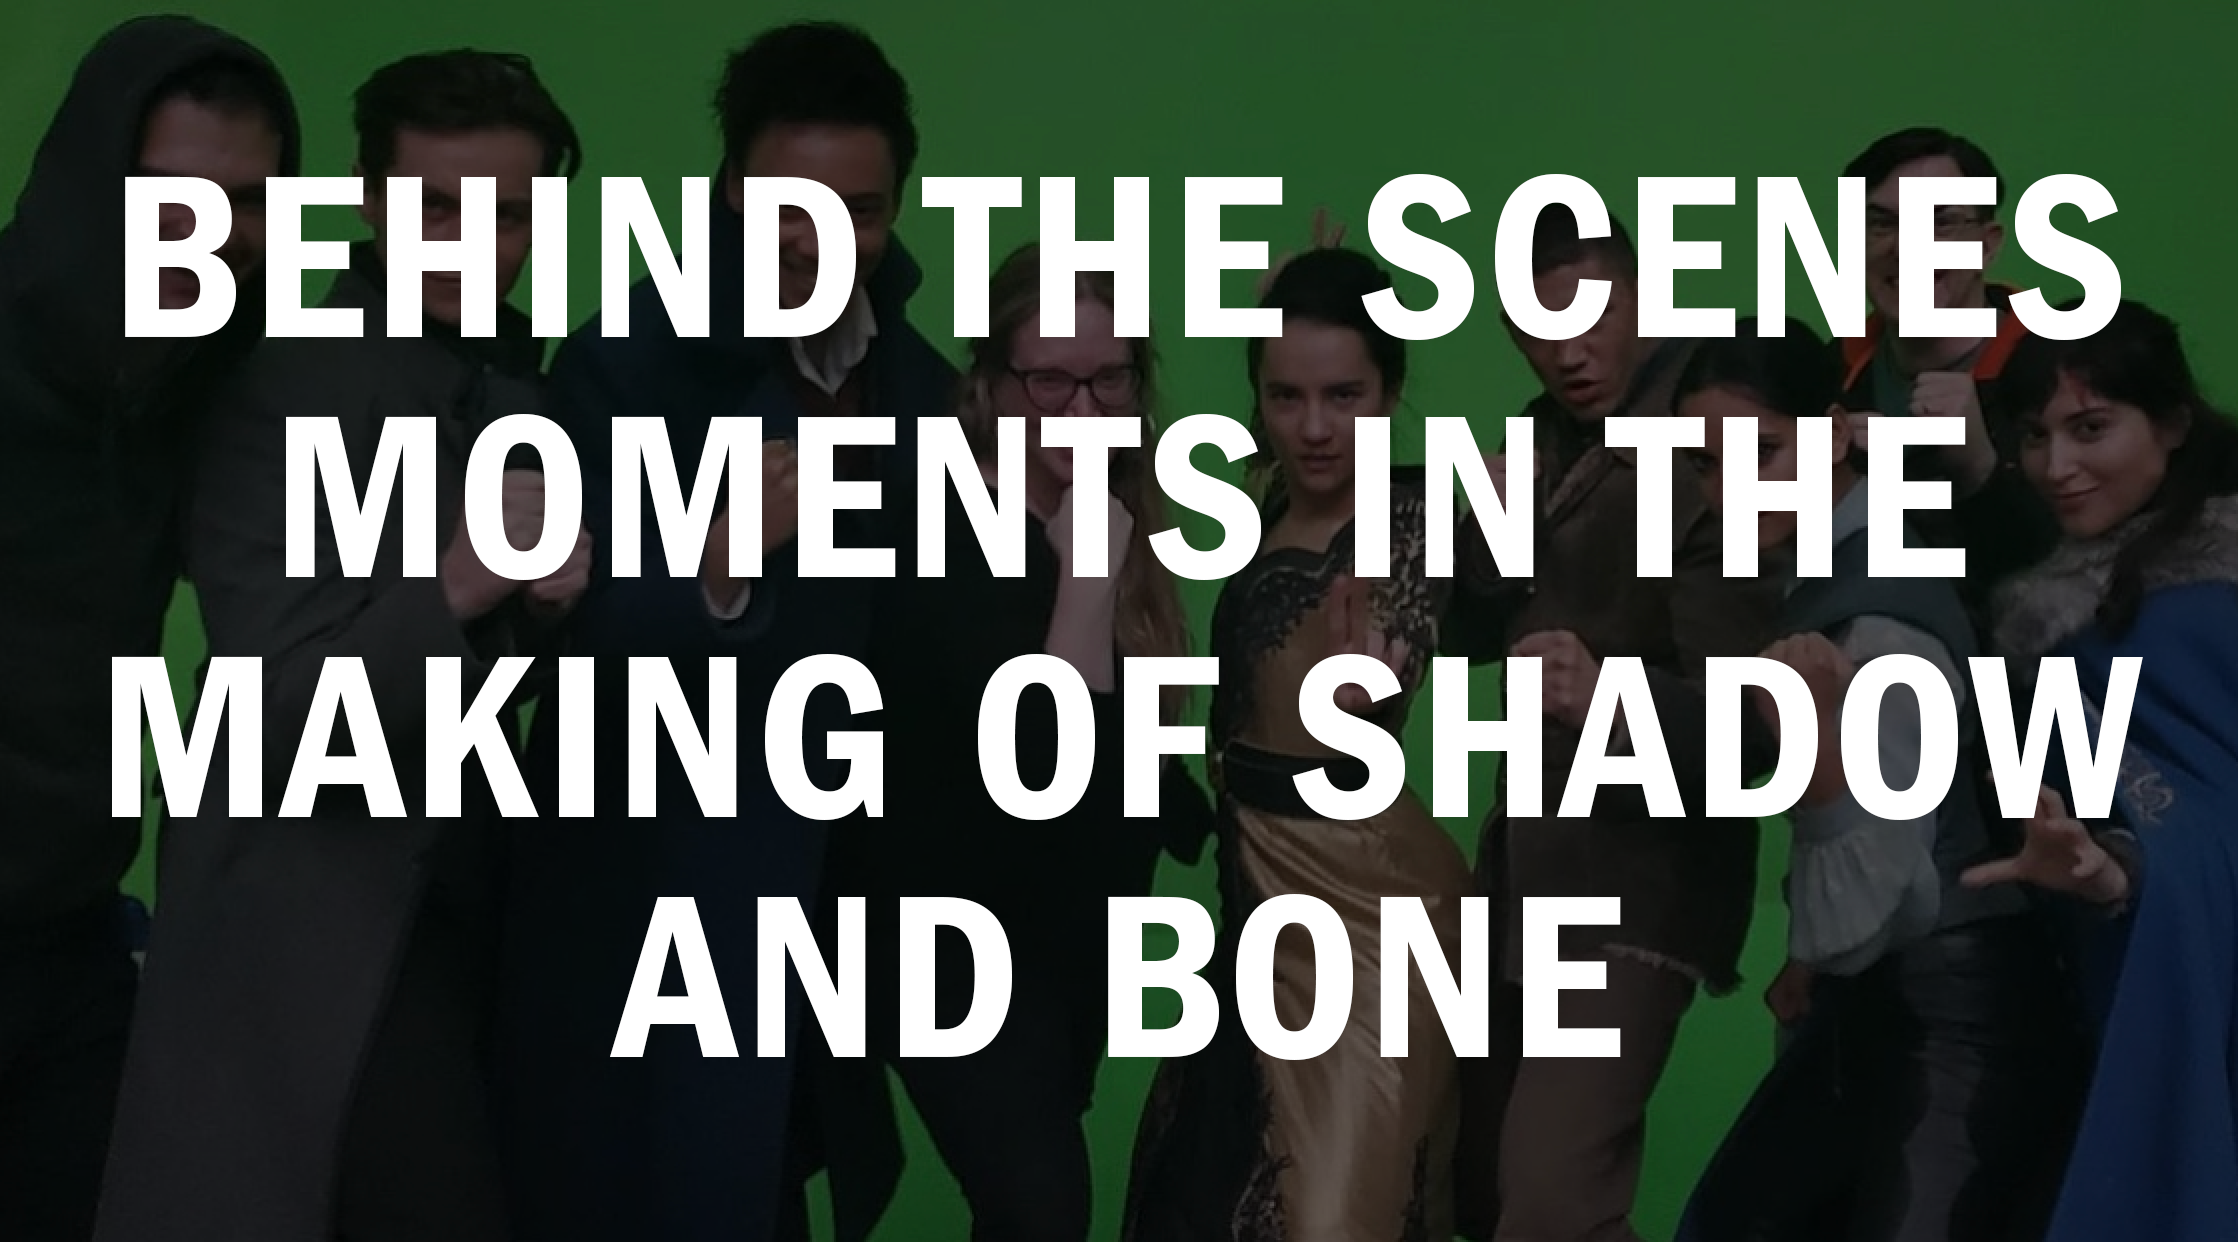 Behind the Scenes Moments in the Making of Shadow and Bone